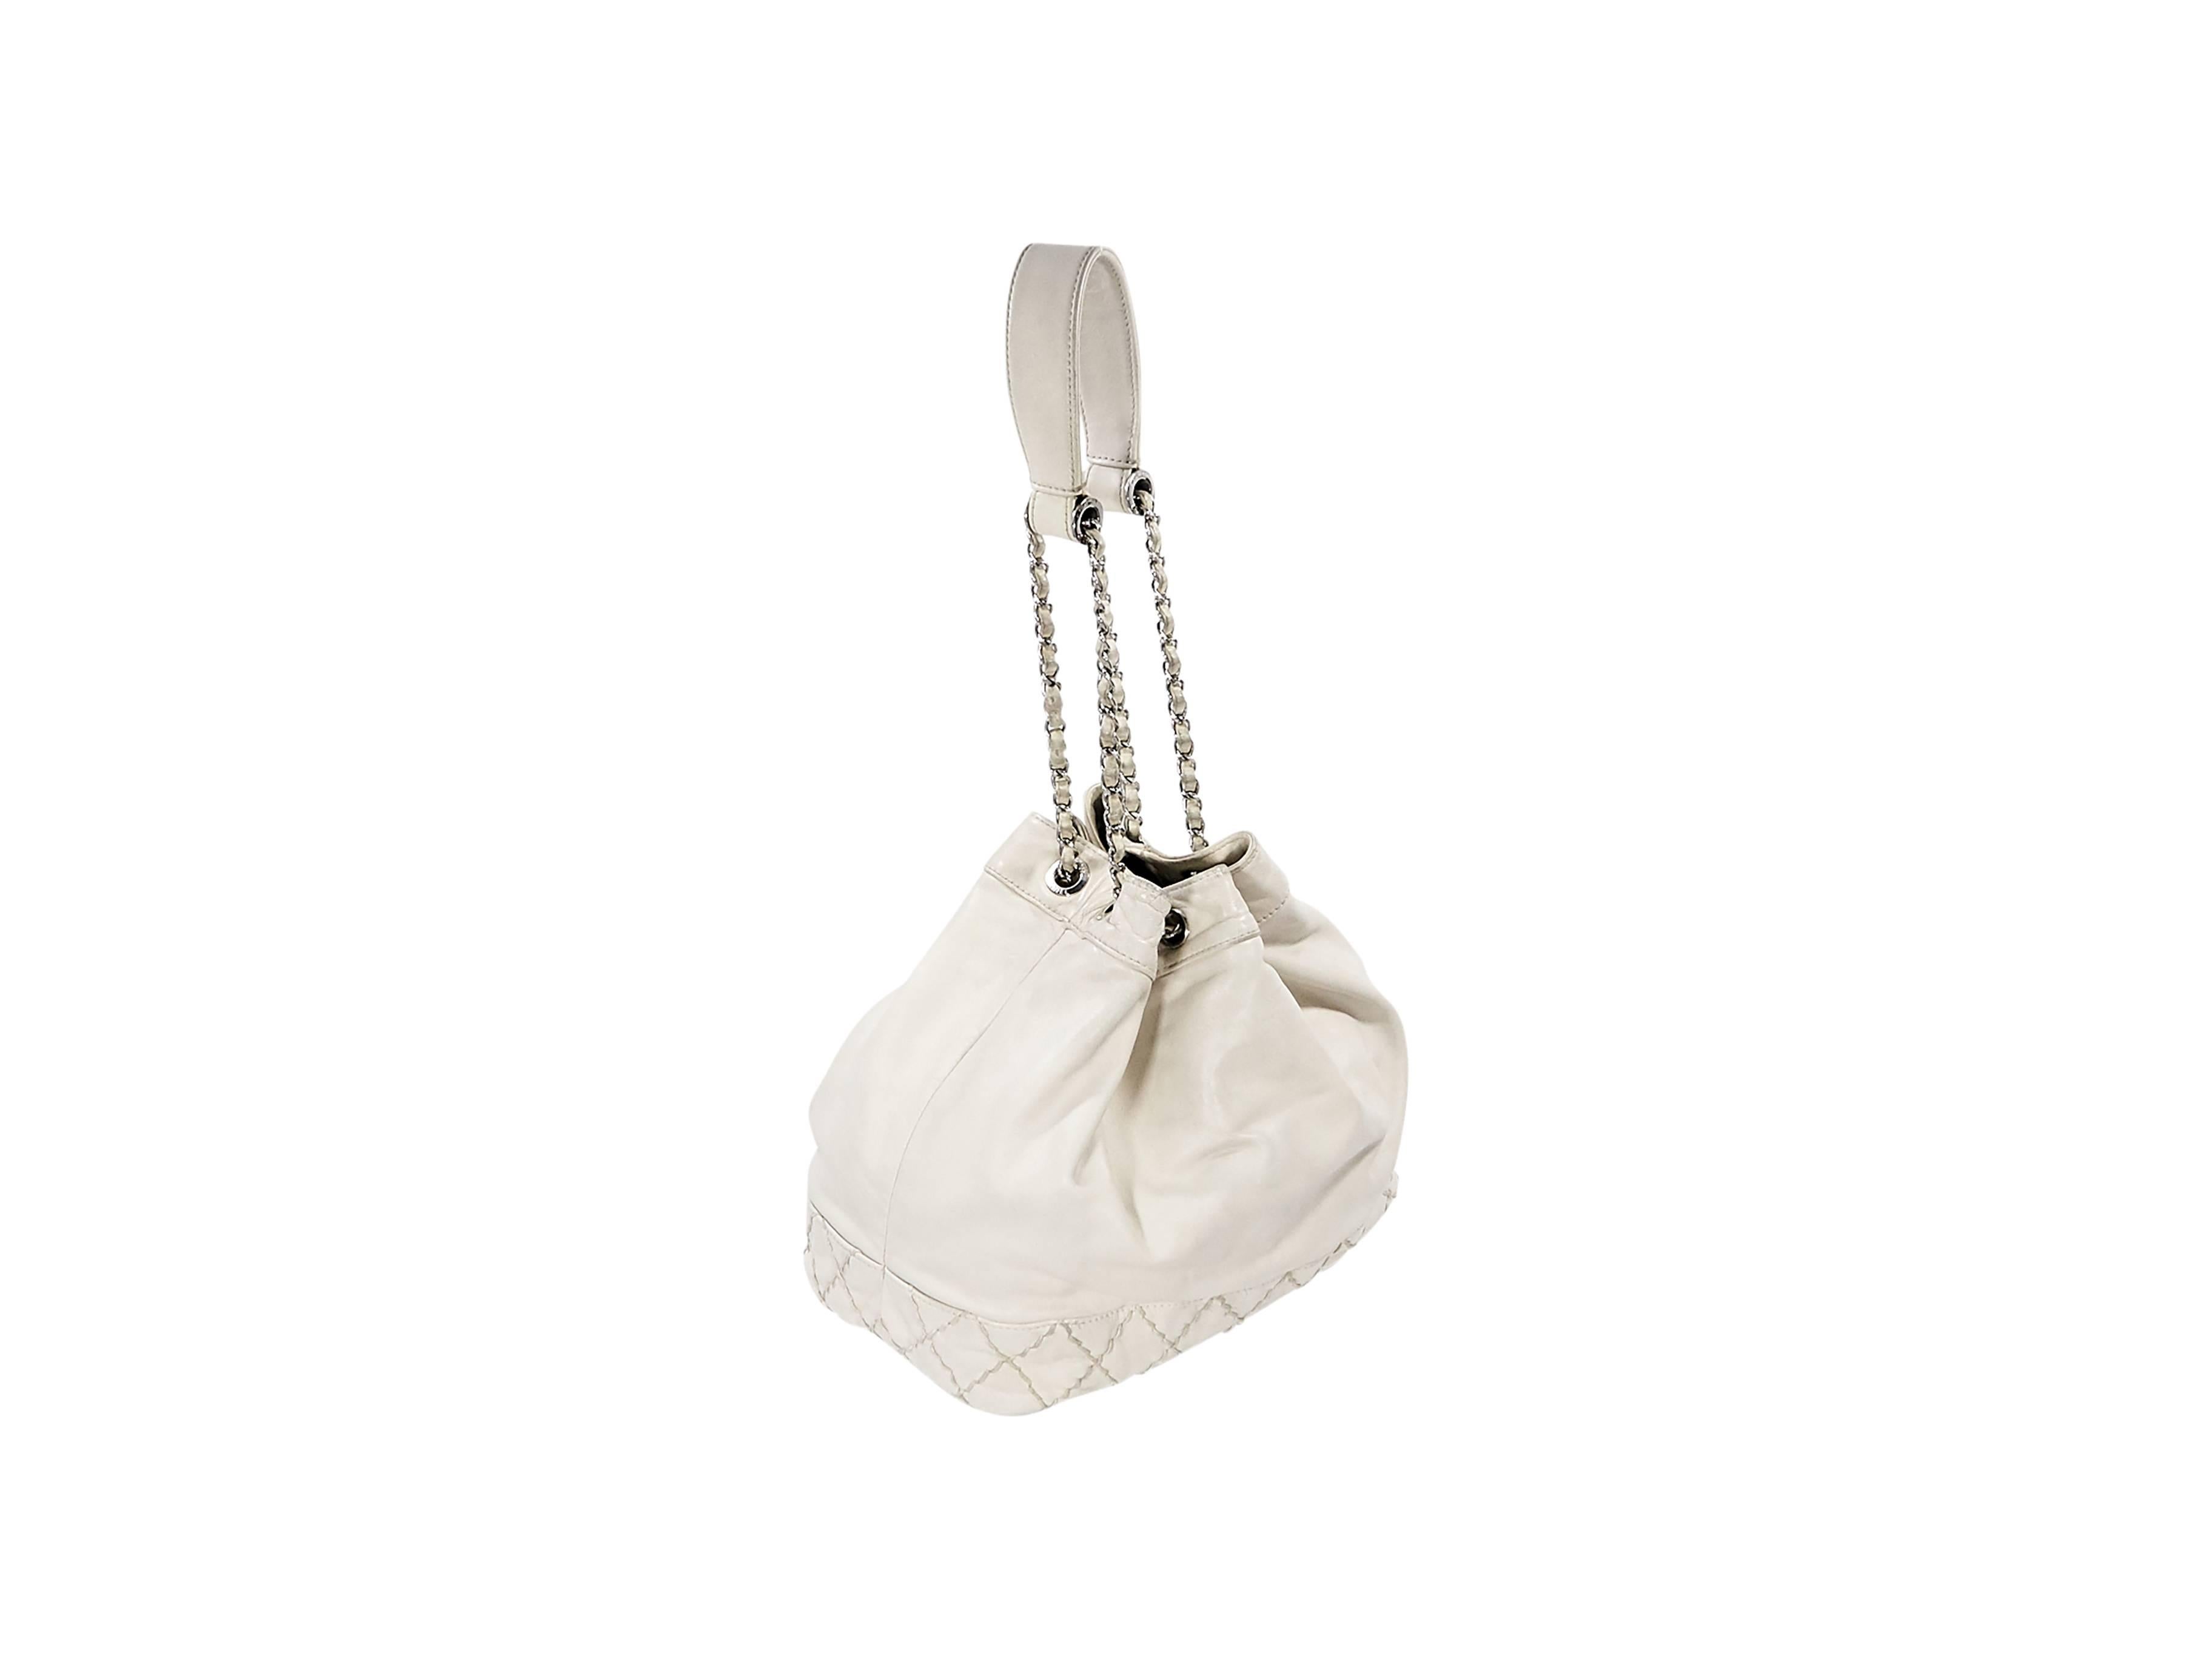 Product details:  Ivory leather quilted Surpique bucket bag by Chanel.  Front topstitched CC logo.  Single shoulder strap.  Drawstring top closure.  Lined interior with inner zip and slide pockets and a key fob.  Protective metal feet.  Silvertone